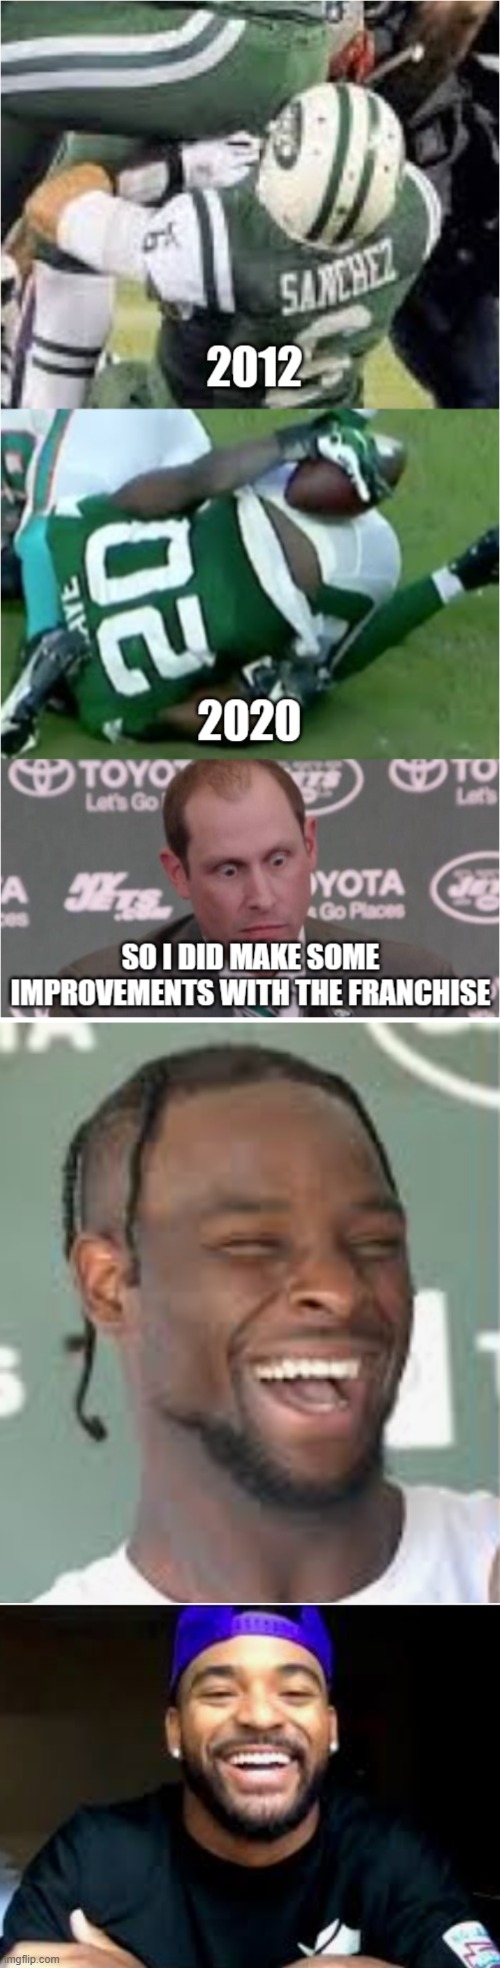 The New York (Butt) Jets | image tagged in new york,jets,marcus maye,mark sanchez,le'veon bell,jamal adams | made w/ Imgflip meme maker